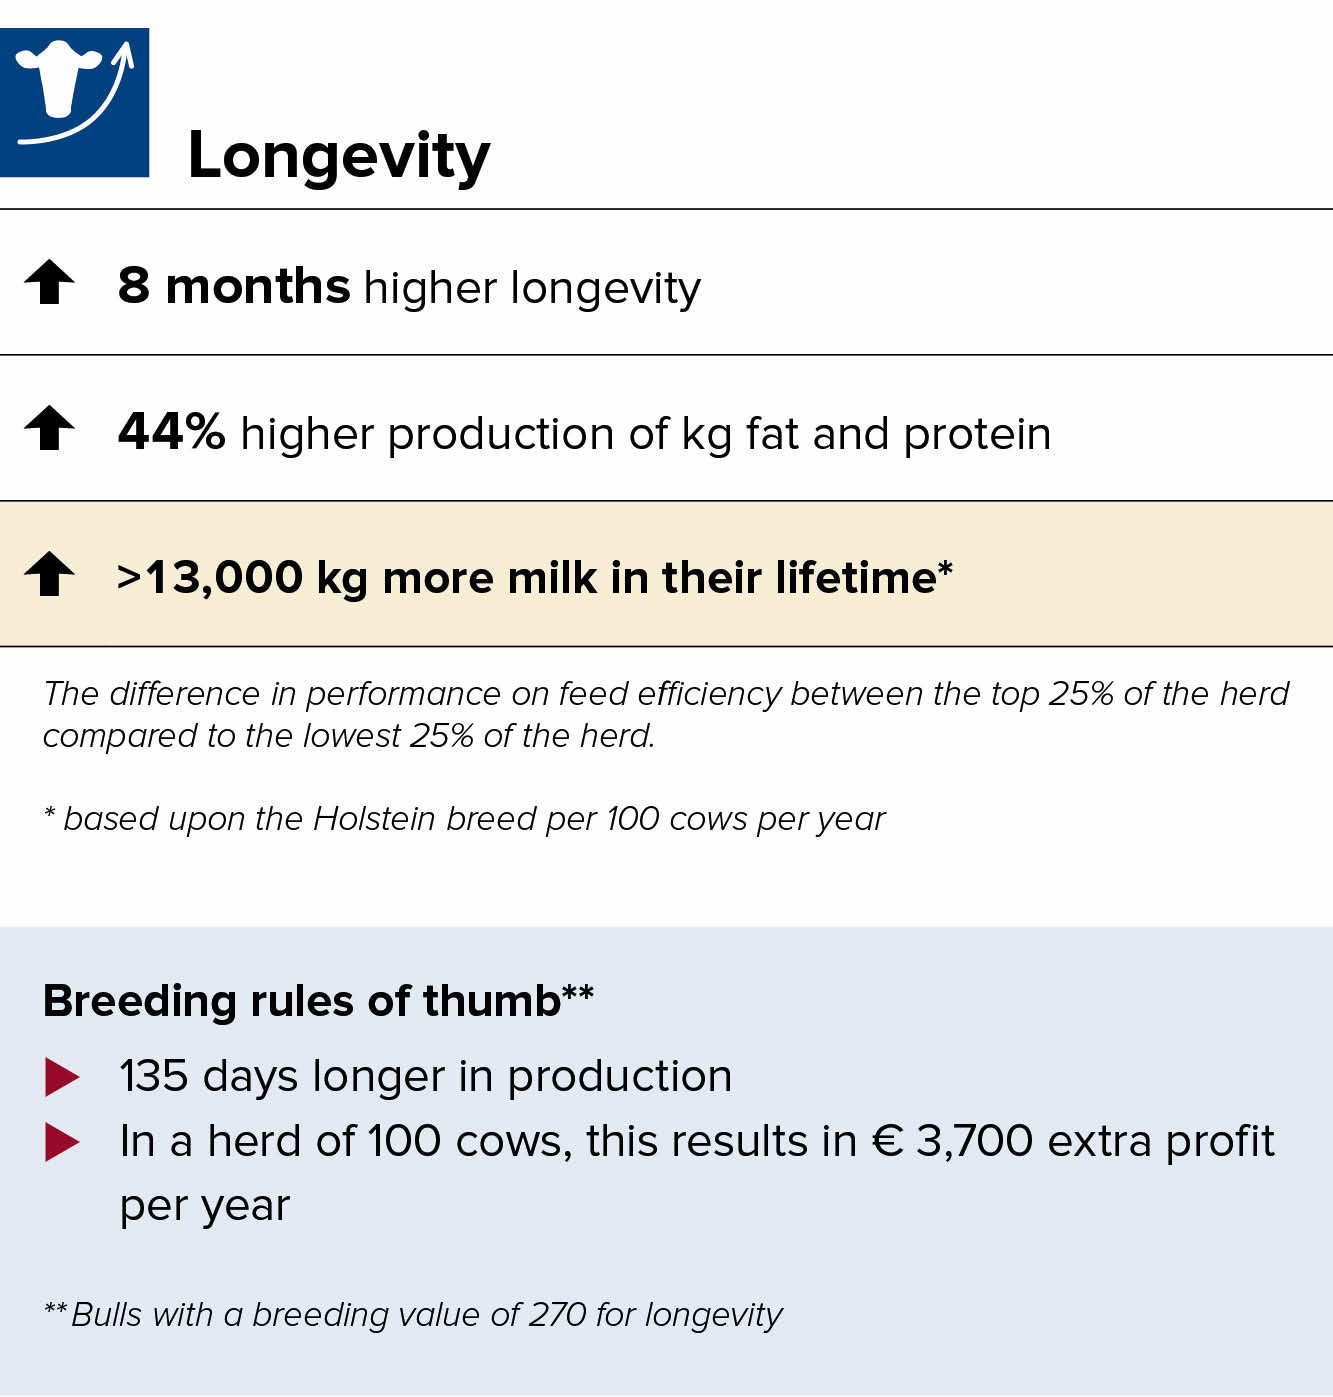 Breeding for longevity does pay off in practice infographic